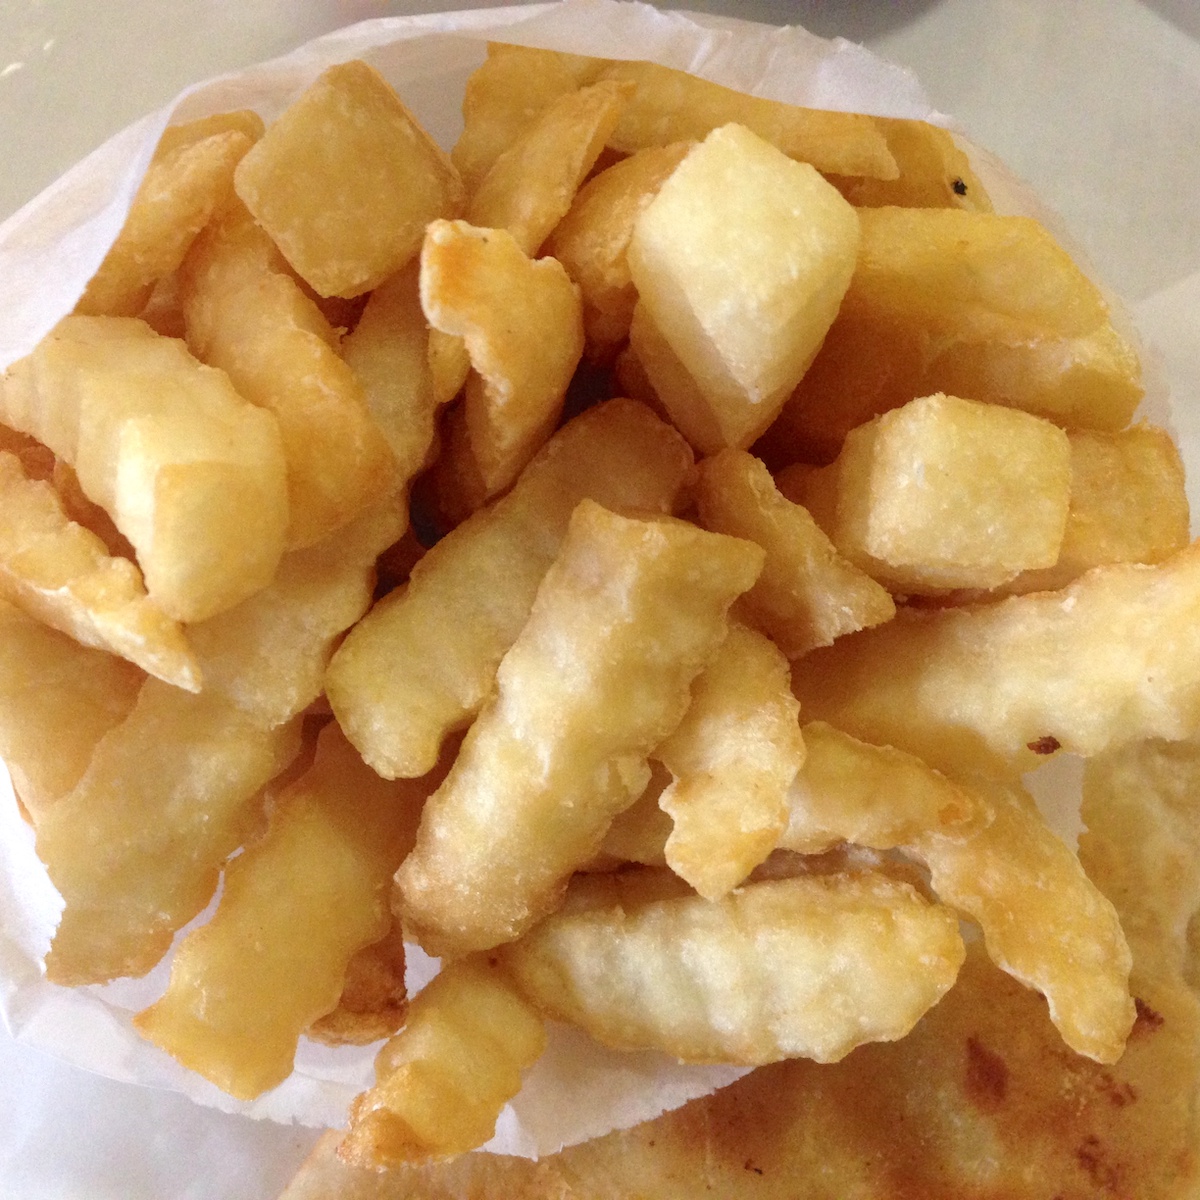 Crinkle Cut Fries from Phillips Grocery in Holly Springs, Mississippi